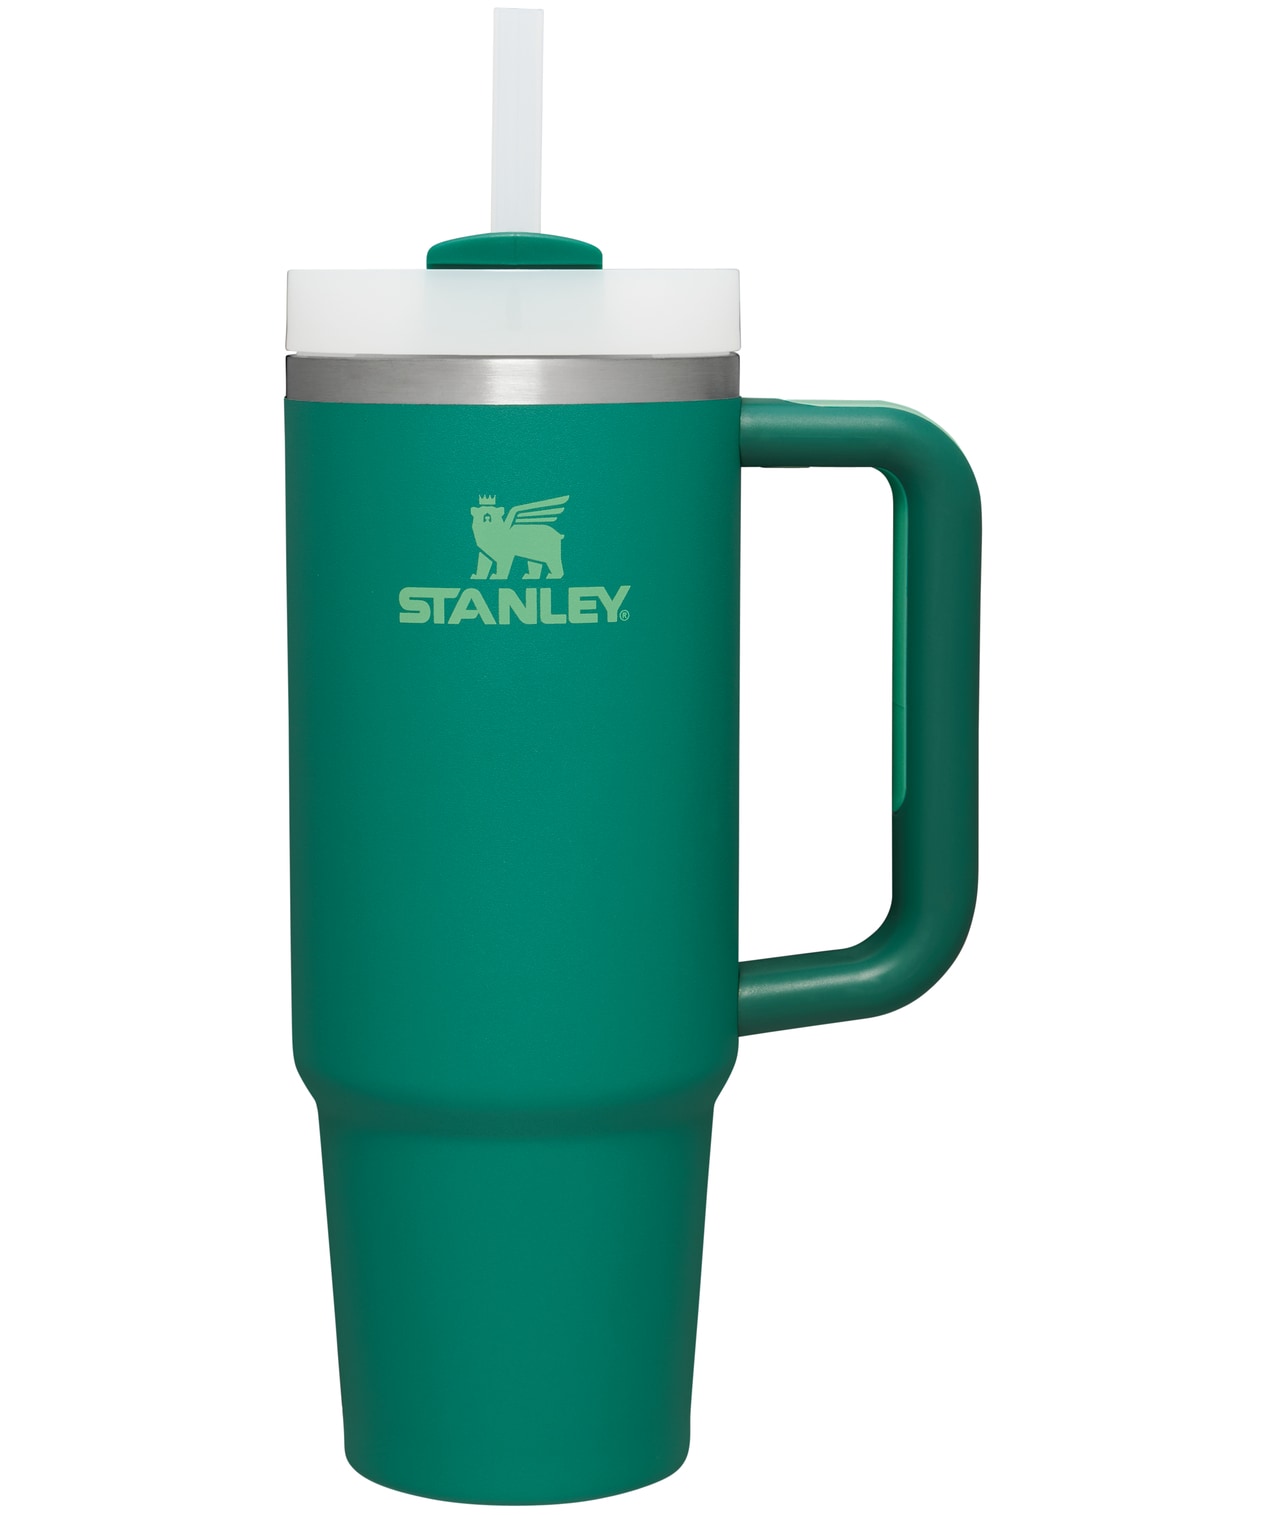 Stanley Quencher 30-fl oz Stainless Steel Insulated Tumbler in the